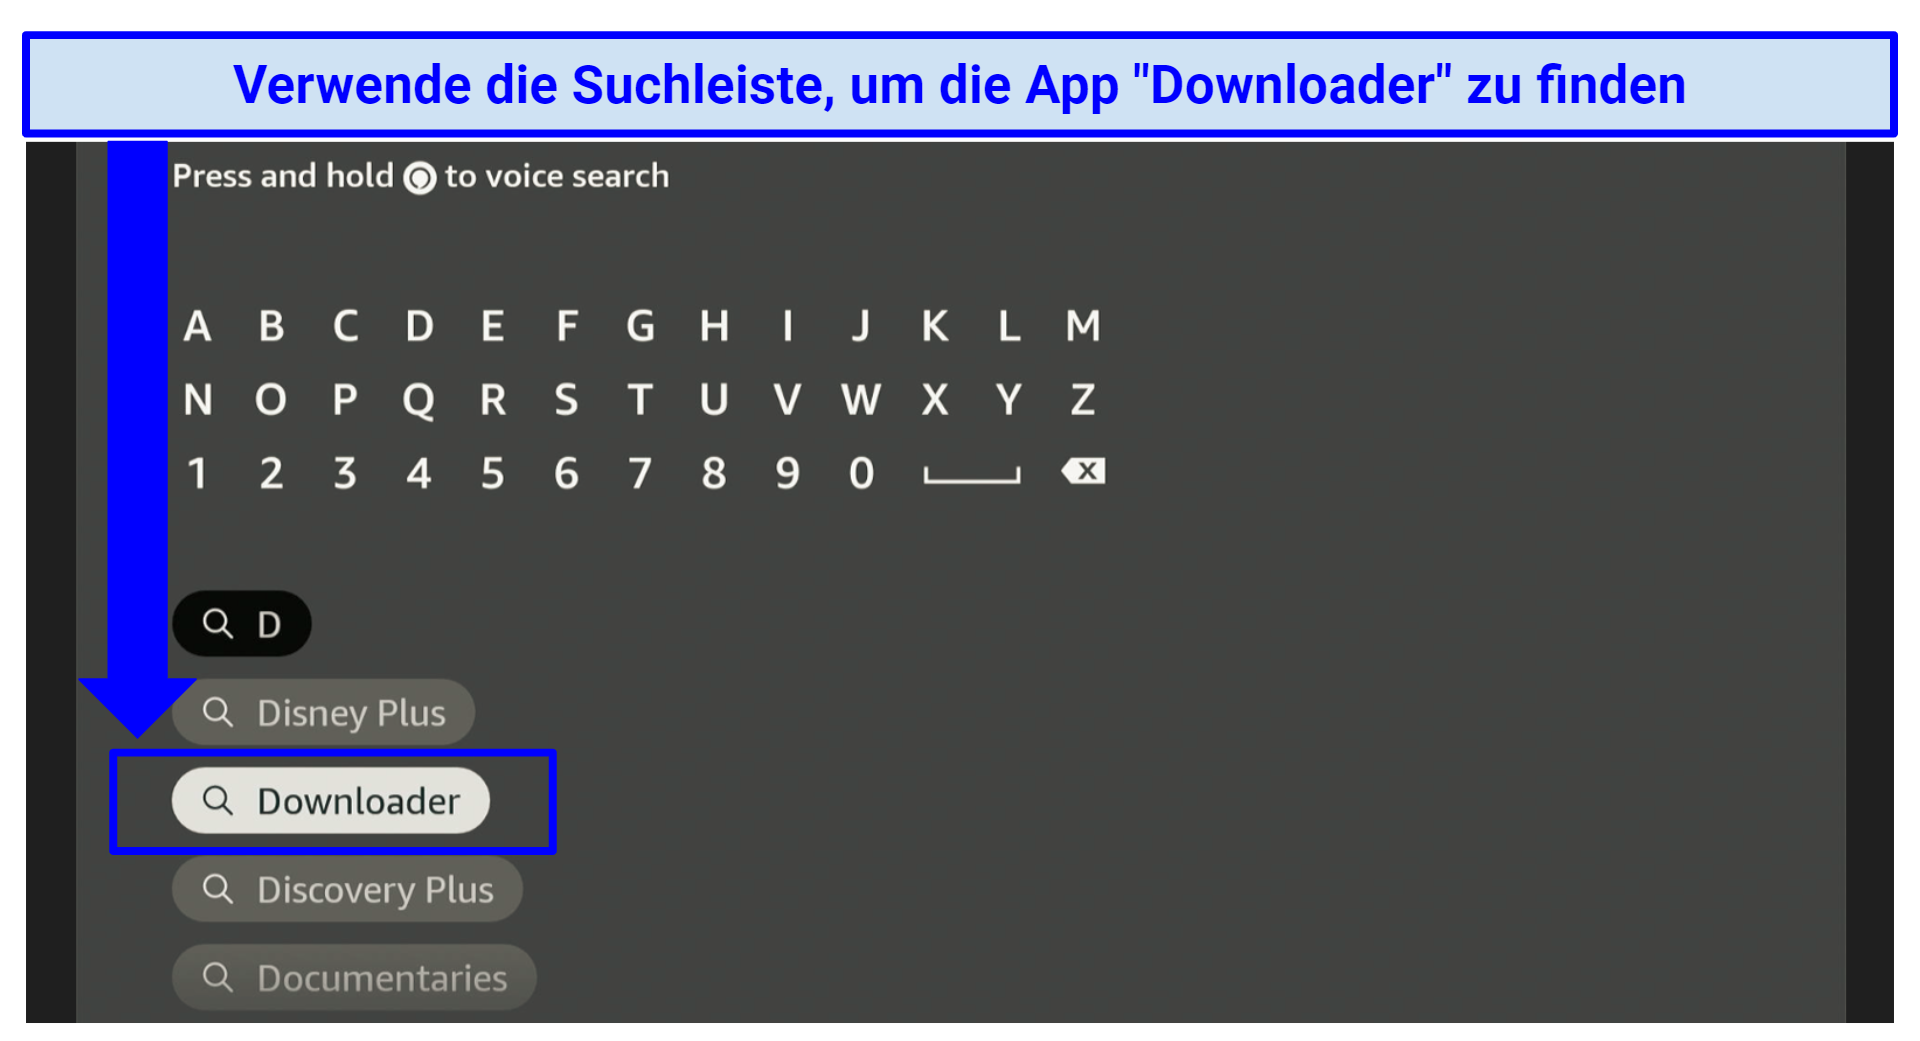 A screenshot showing the Downloader app is available on Amazon Appstore